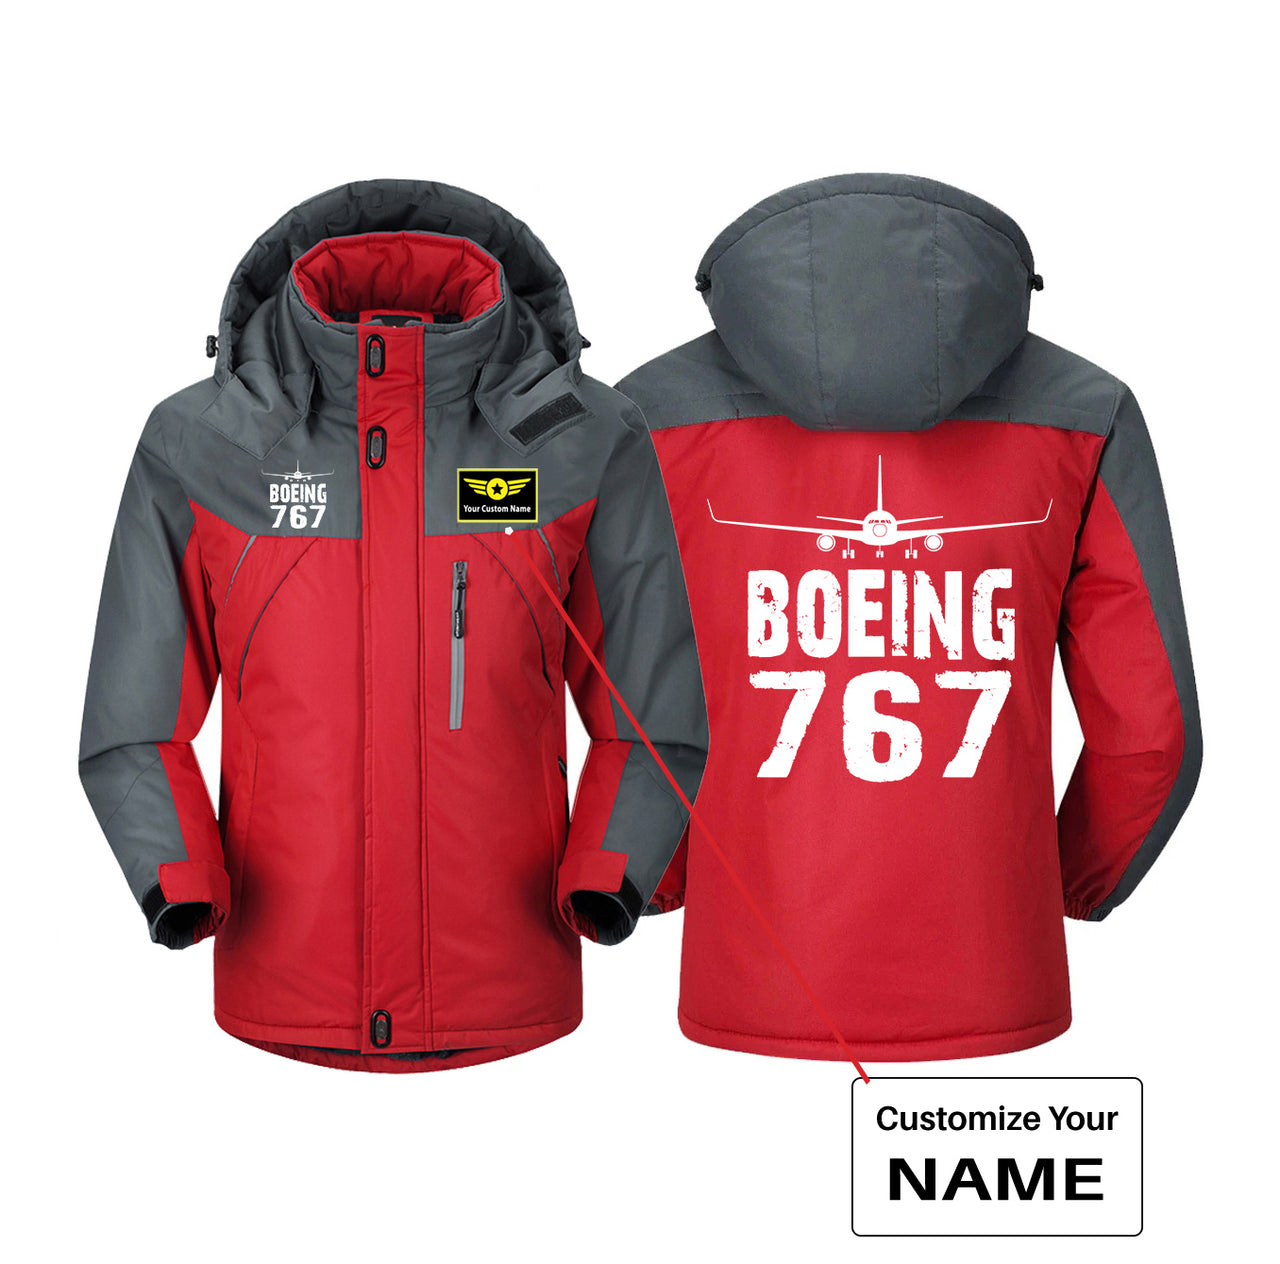 Boeing 767 & Plane Designed Thick Winter Jackets